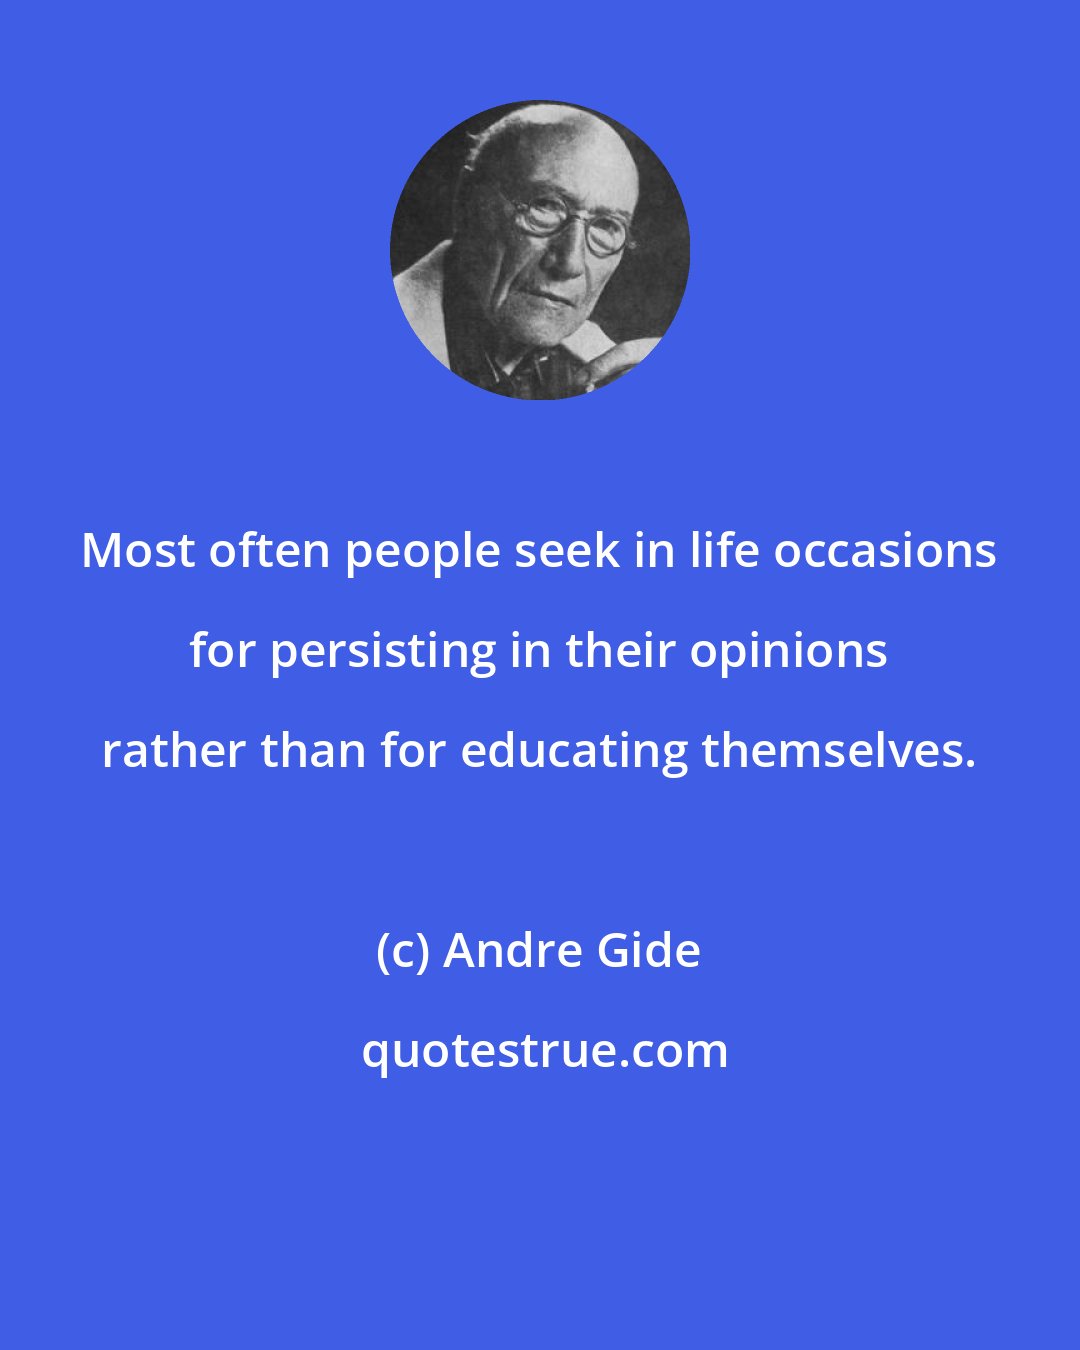 Andre Gide: Most often people seek in life occasions for persisting in their opinions rather than for educating themselves.